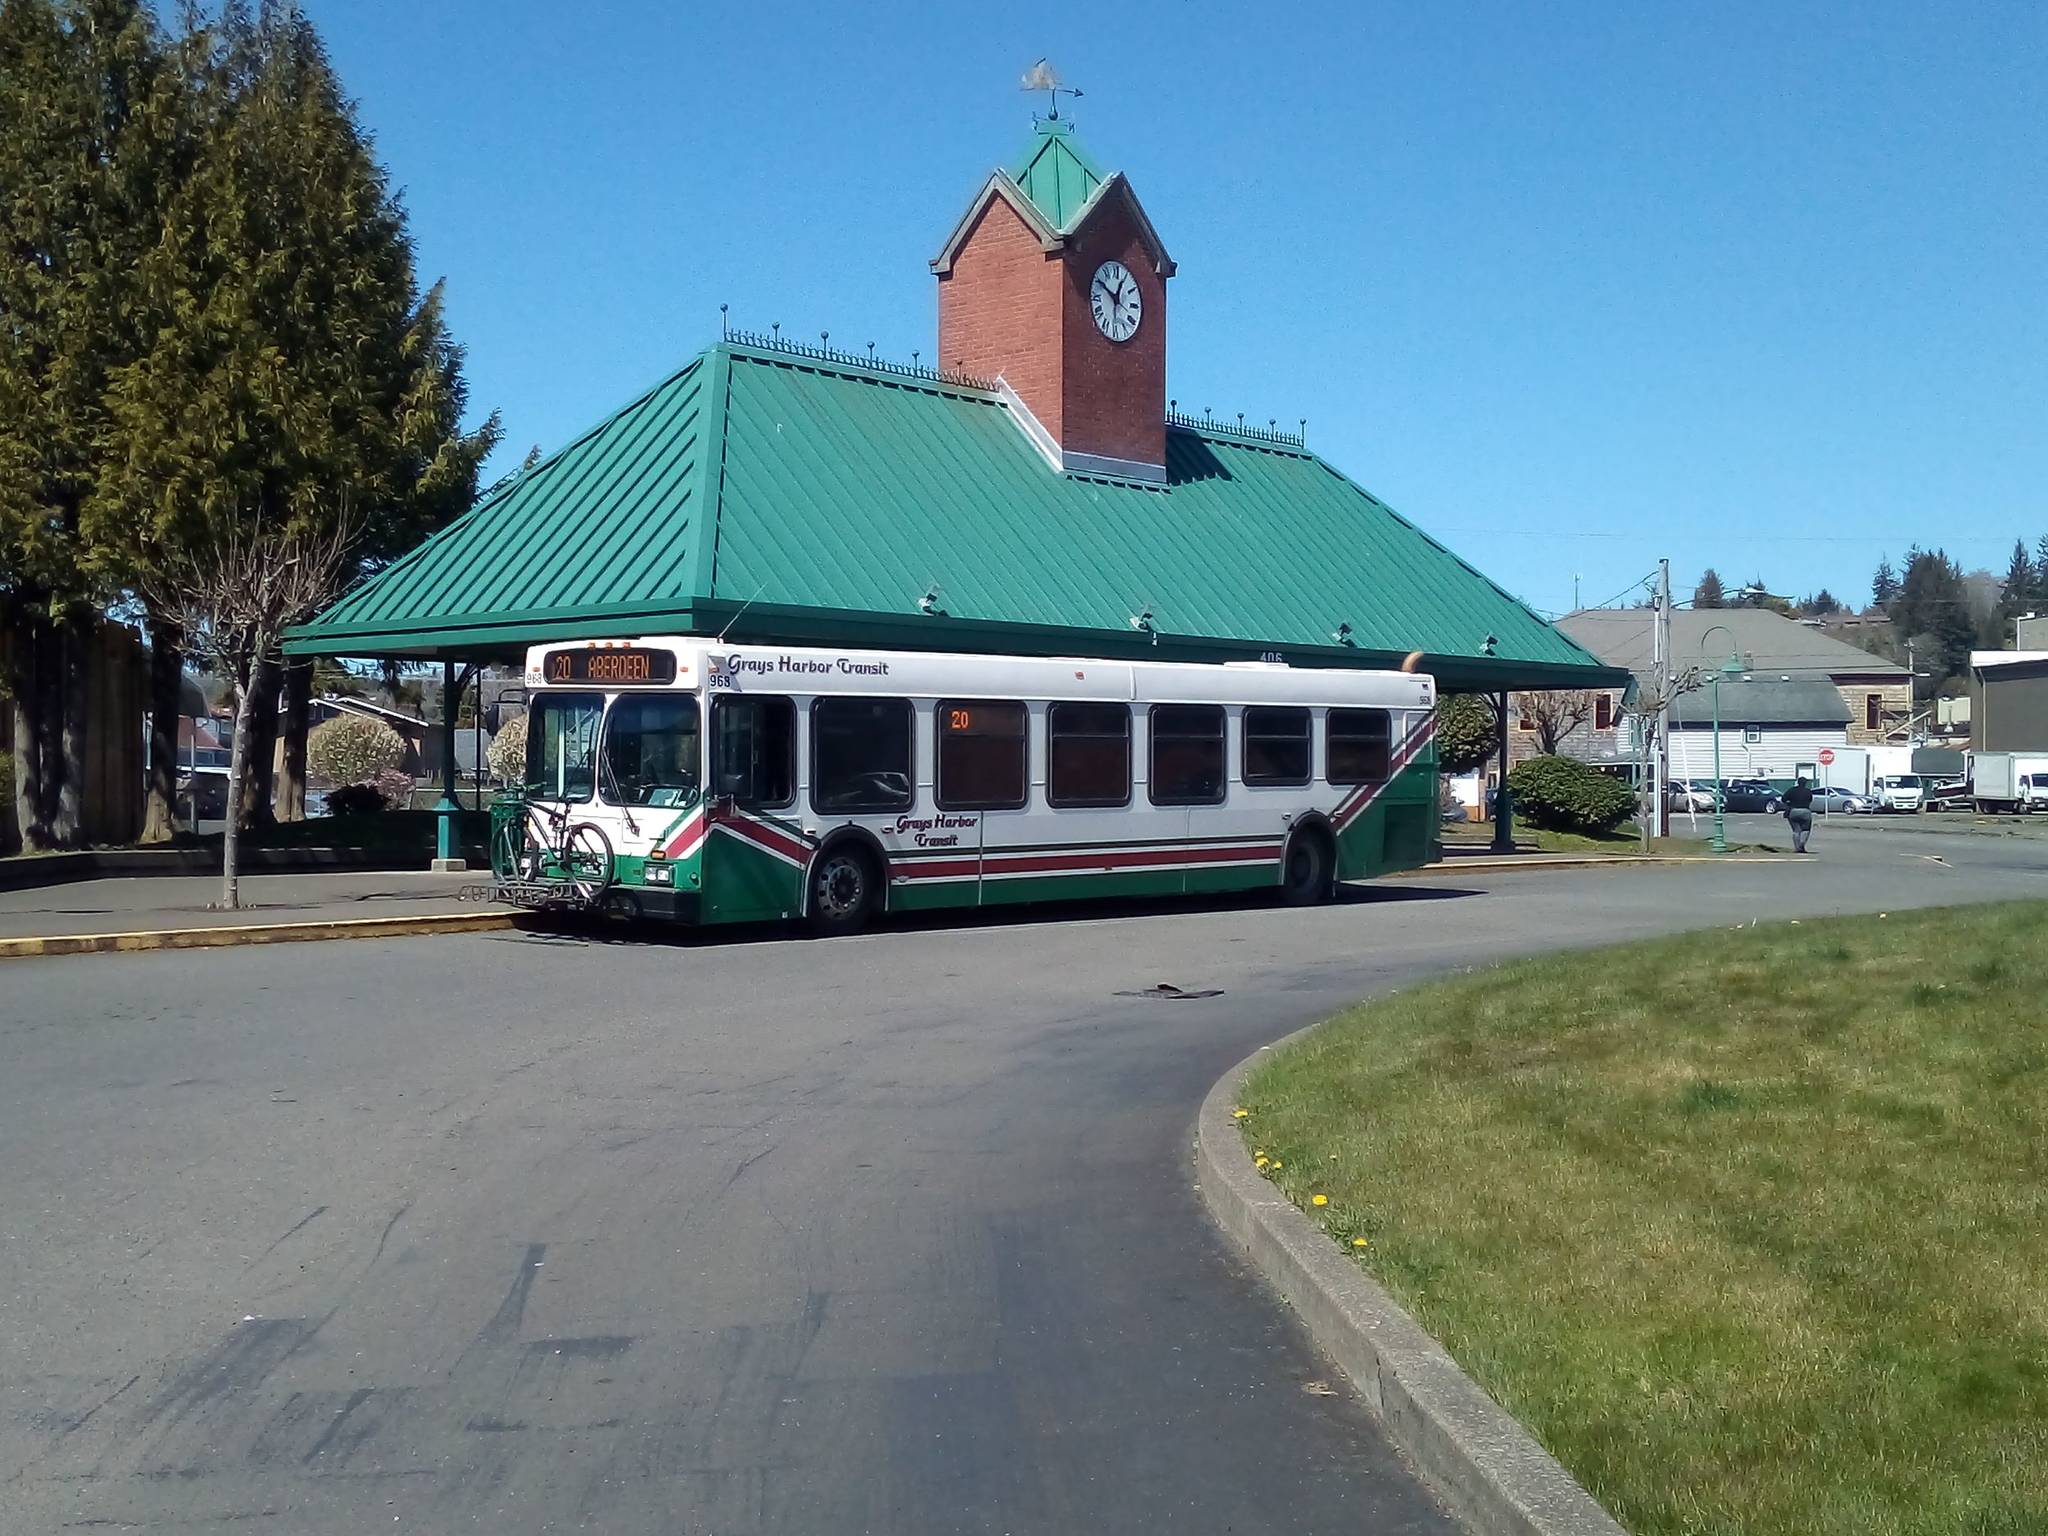 David Haerle/The Daily World 
A Grays Harbor Transit bus stops at the Hoquiam bus station Wednesday afternoon to drop off and take on passengers on Route 20.